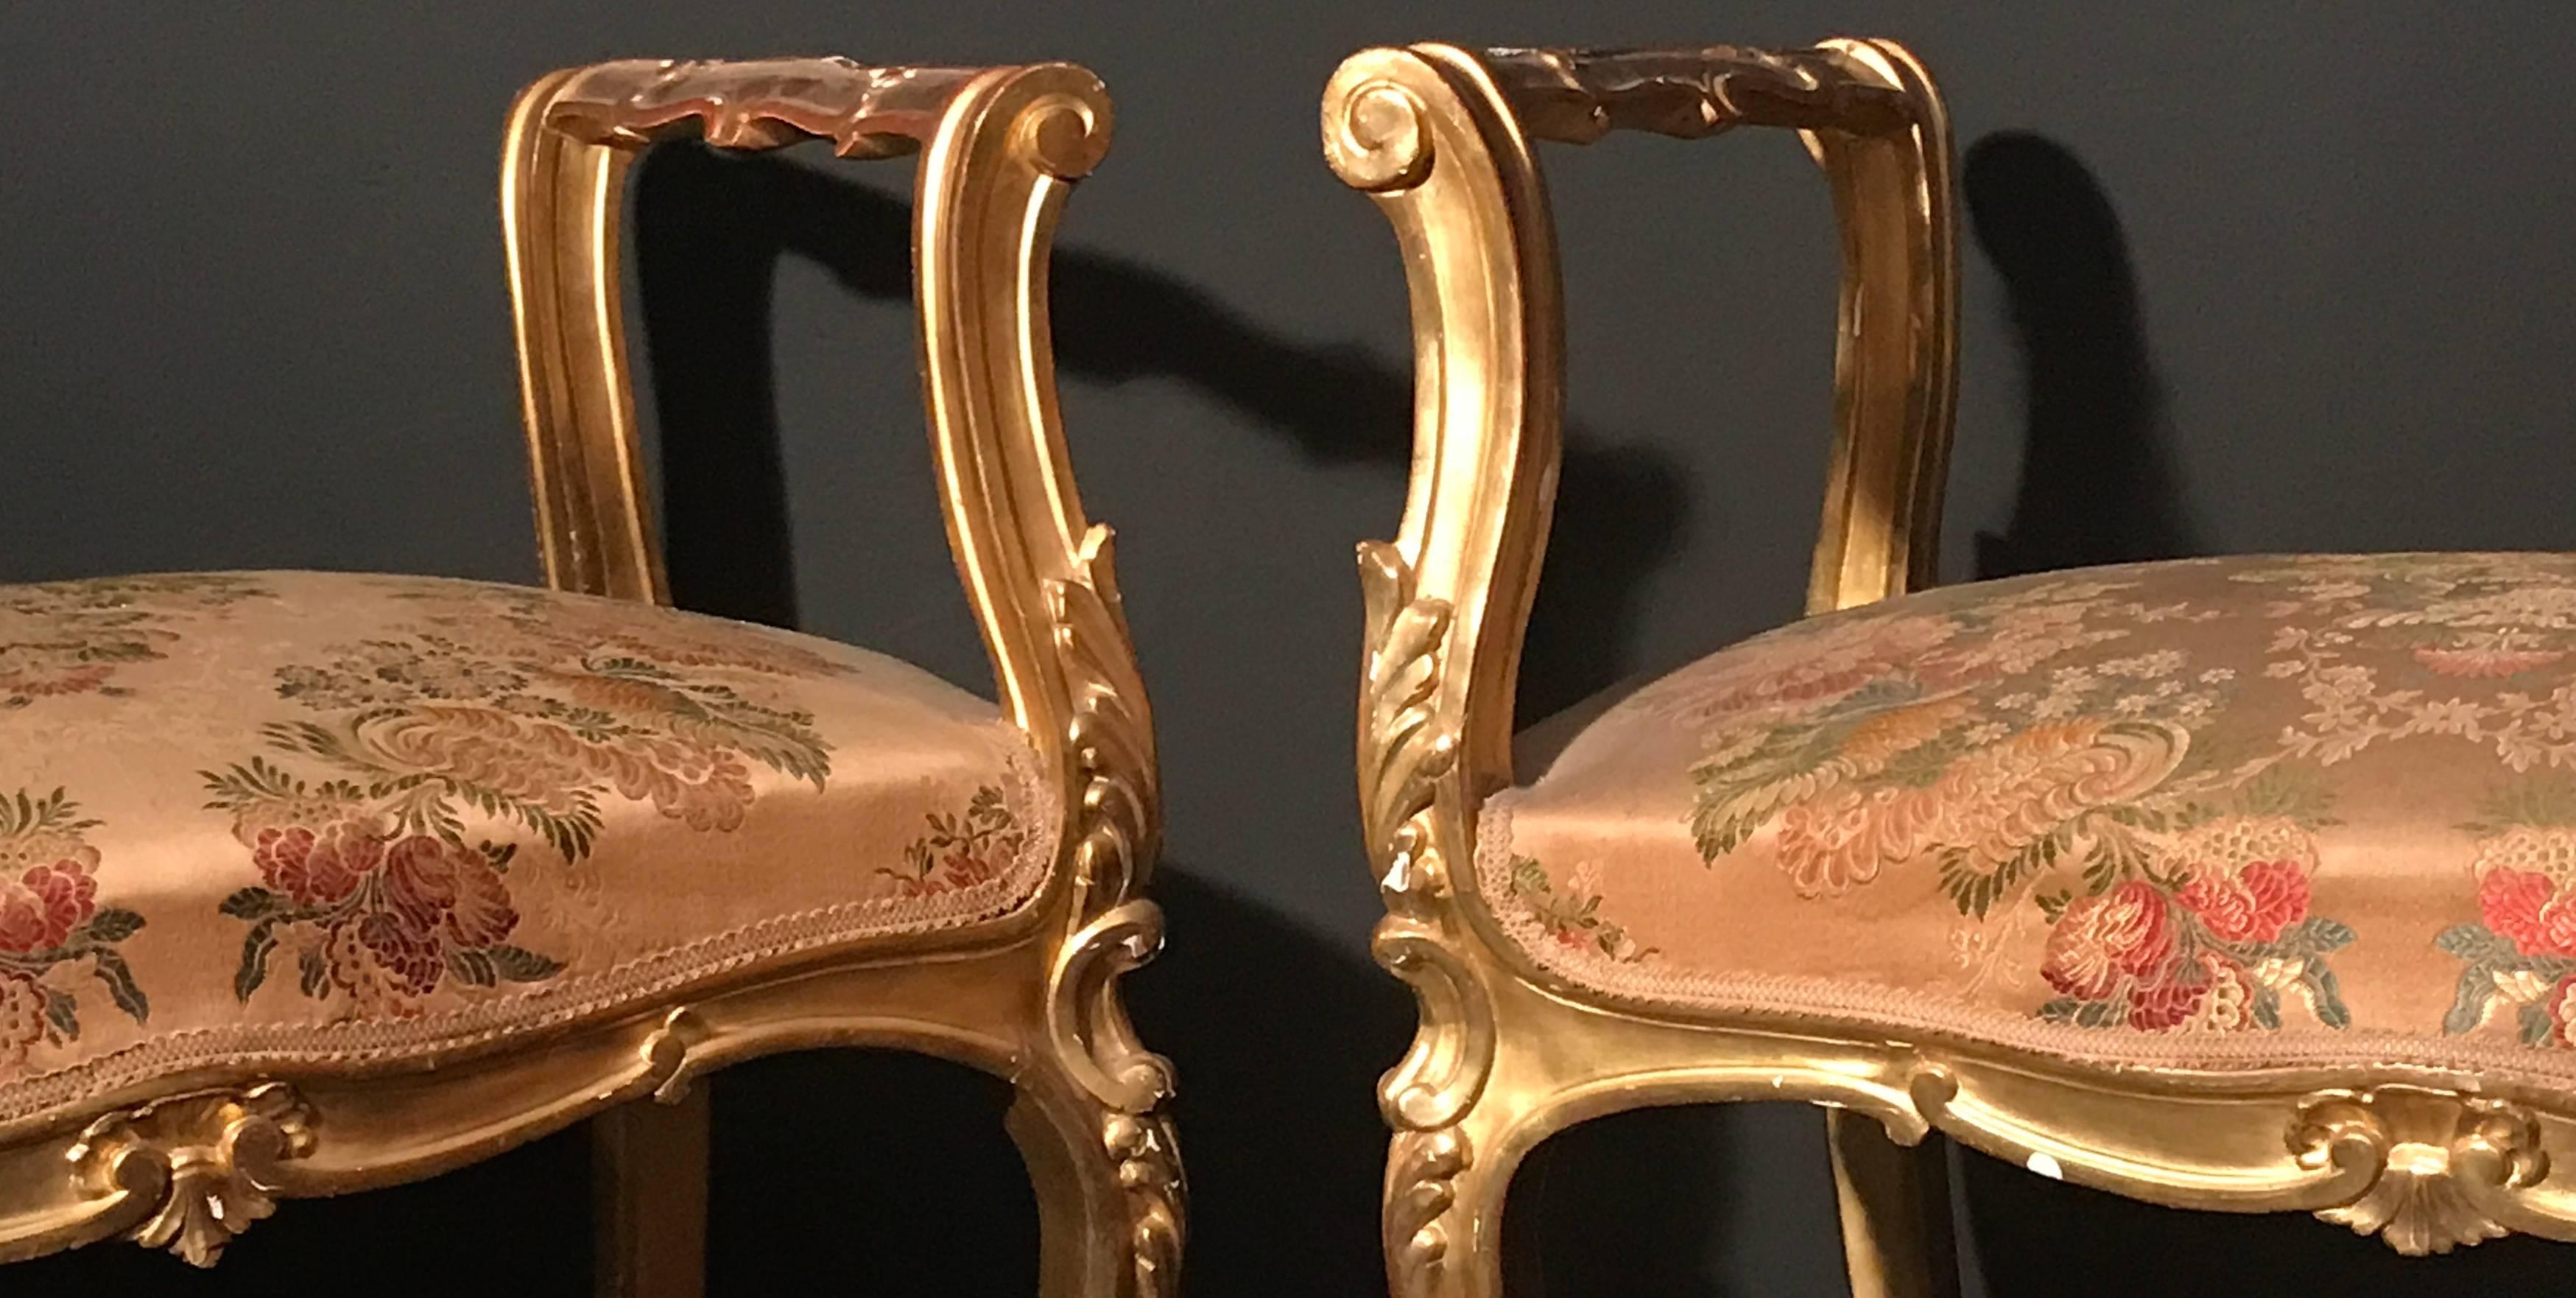 Pair of 19th Century Italian Gilt-Wood  Window Benches or Settees For Sale 1